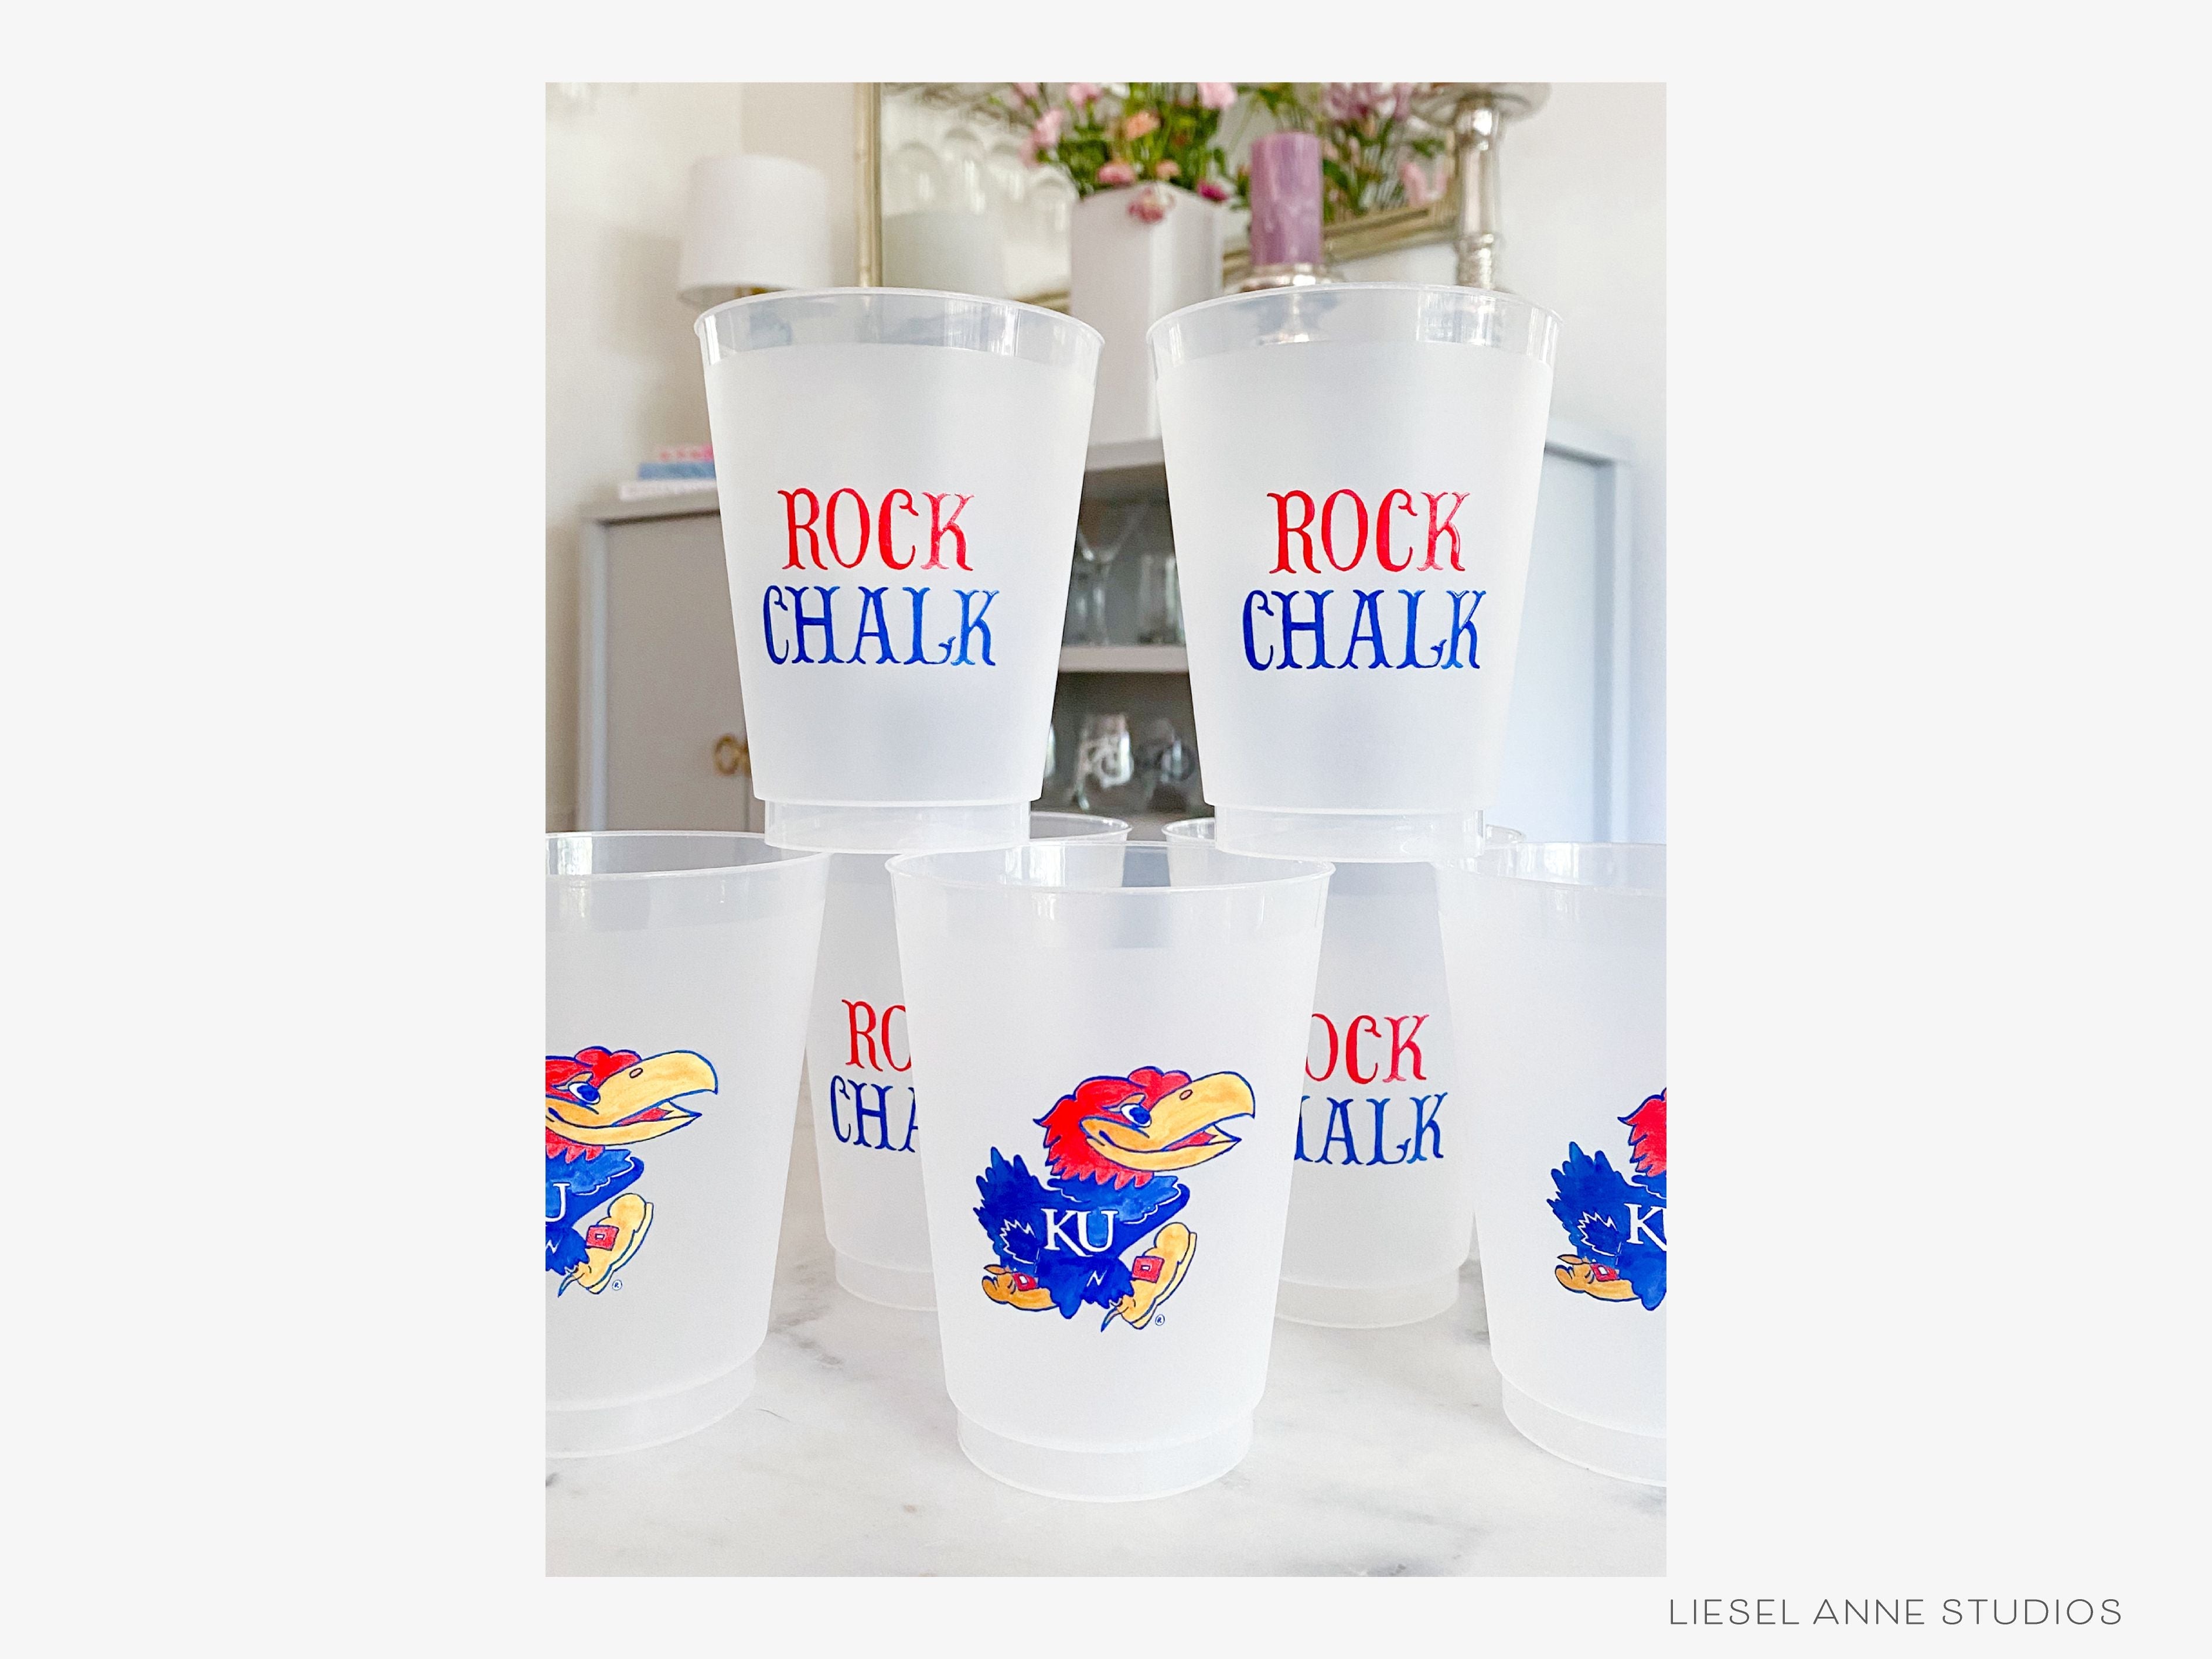 Jayhawk *Officially Licensed* 16oz Shatterproof Cups (Set of 8)-These officially licensed Kansas Jayhawk shatterproof cups feature our hand-painted Jayhawk and Rock Chalk text and make great party decorations for watch parties, graduation, game days and more! They come in sets of 8 and are re-usable for other parties to come or make wonderful party favors!-The Singing Little Bird